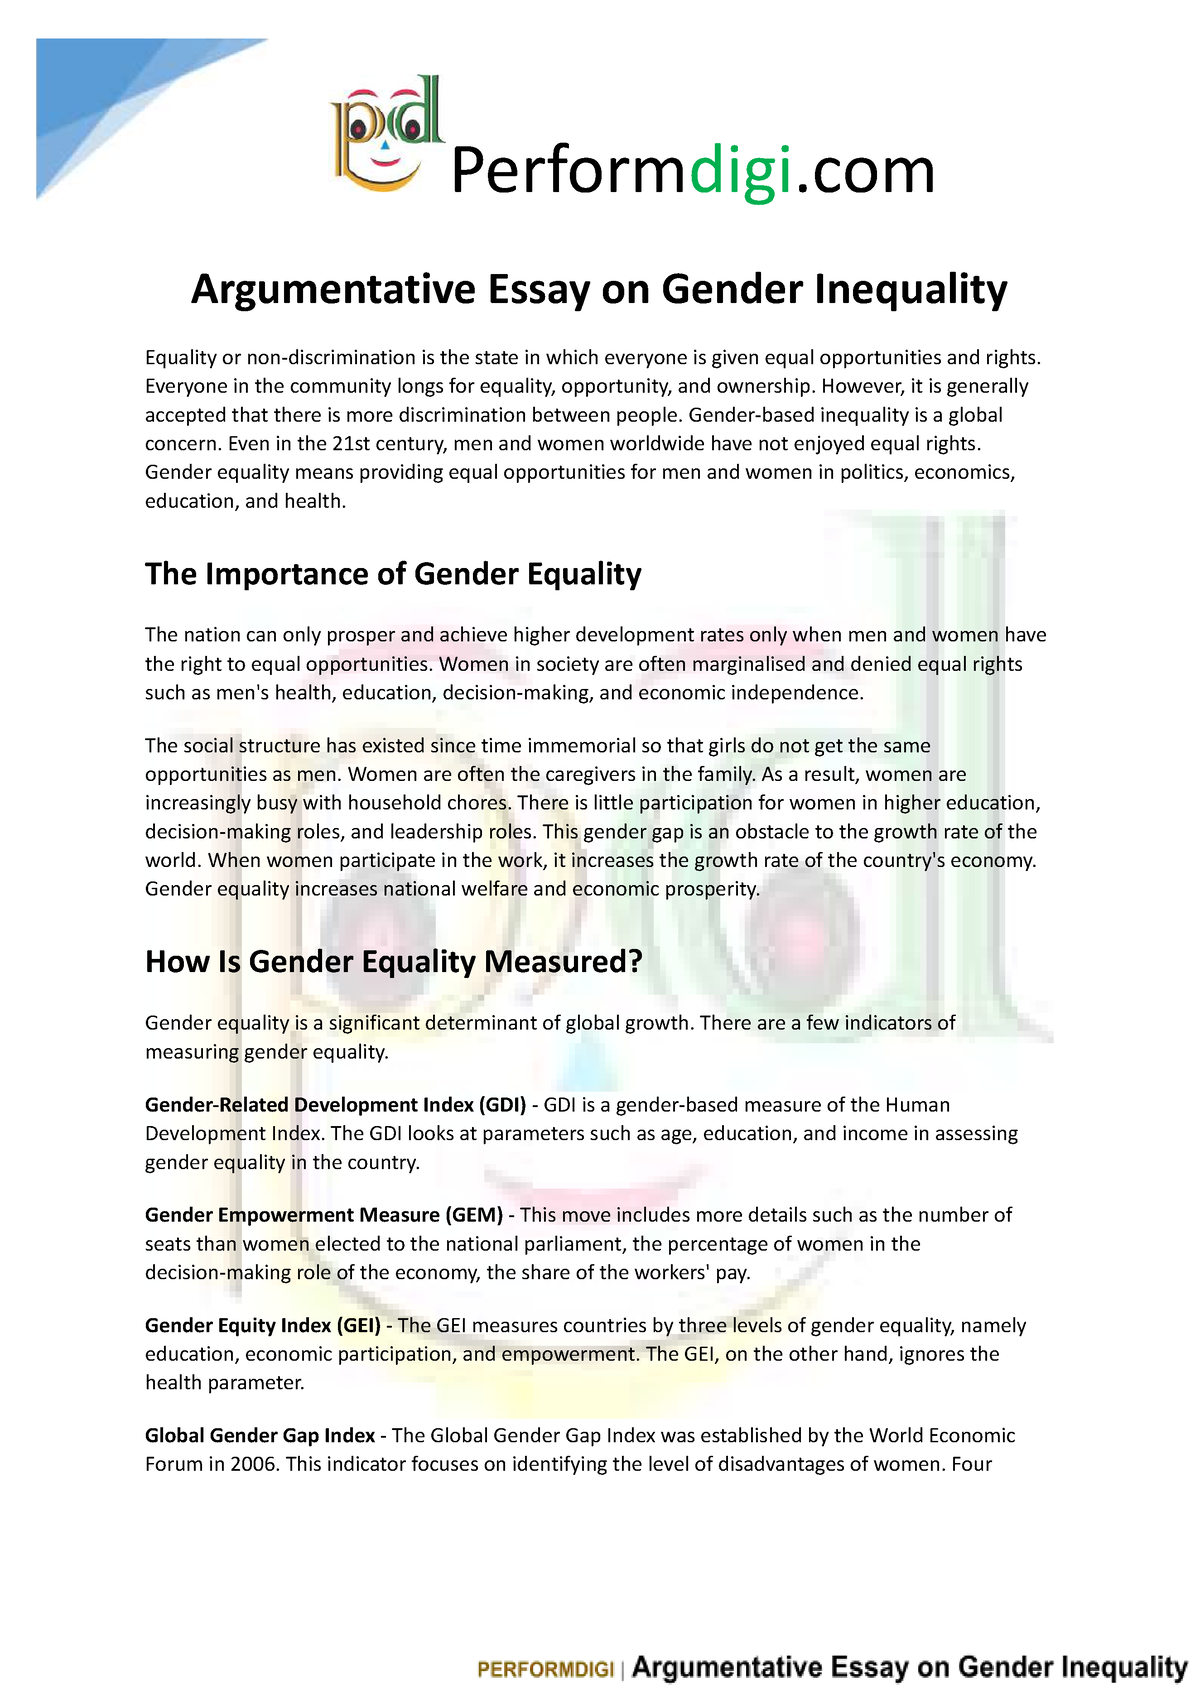 how to write an essay on gender inequality